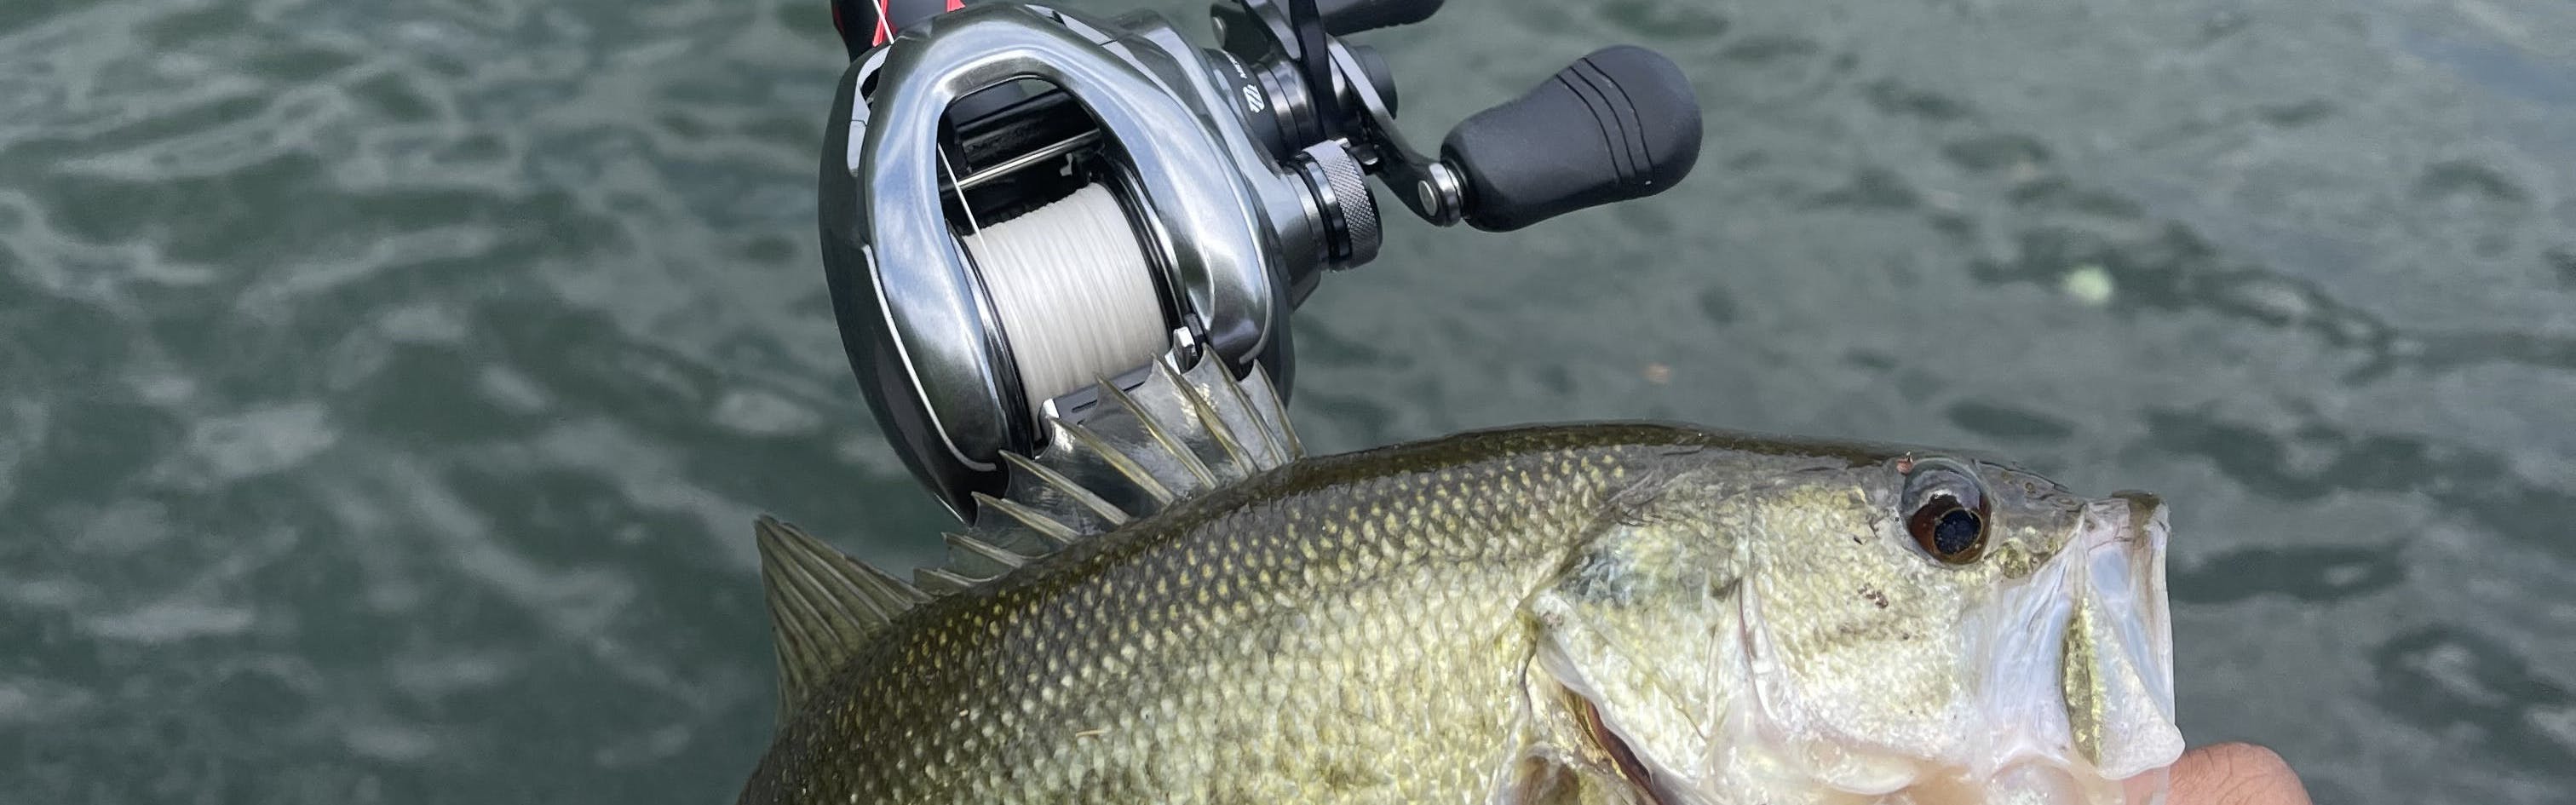 Shimano New Additions to Freshwater Lure Lineup – Guide Fishing